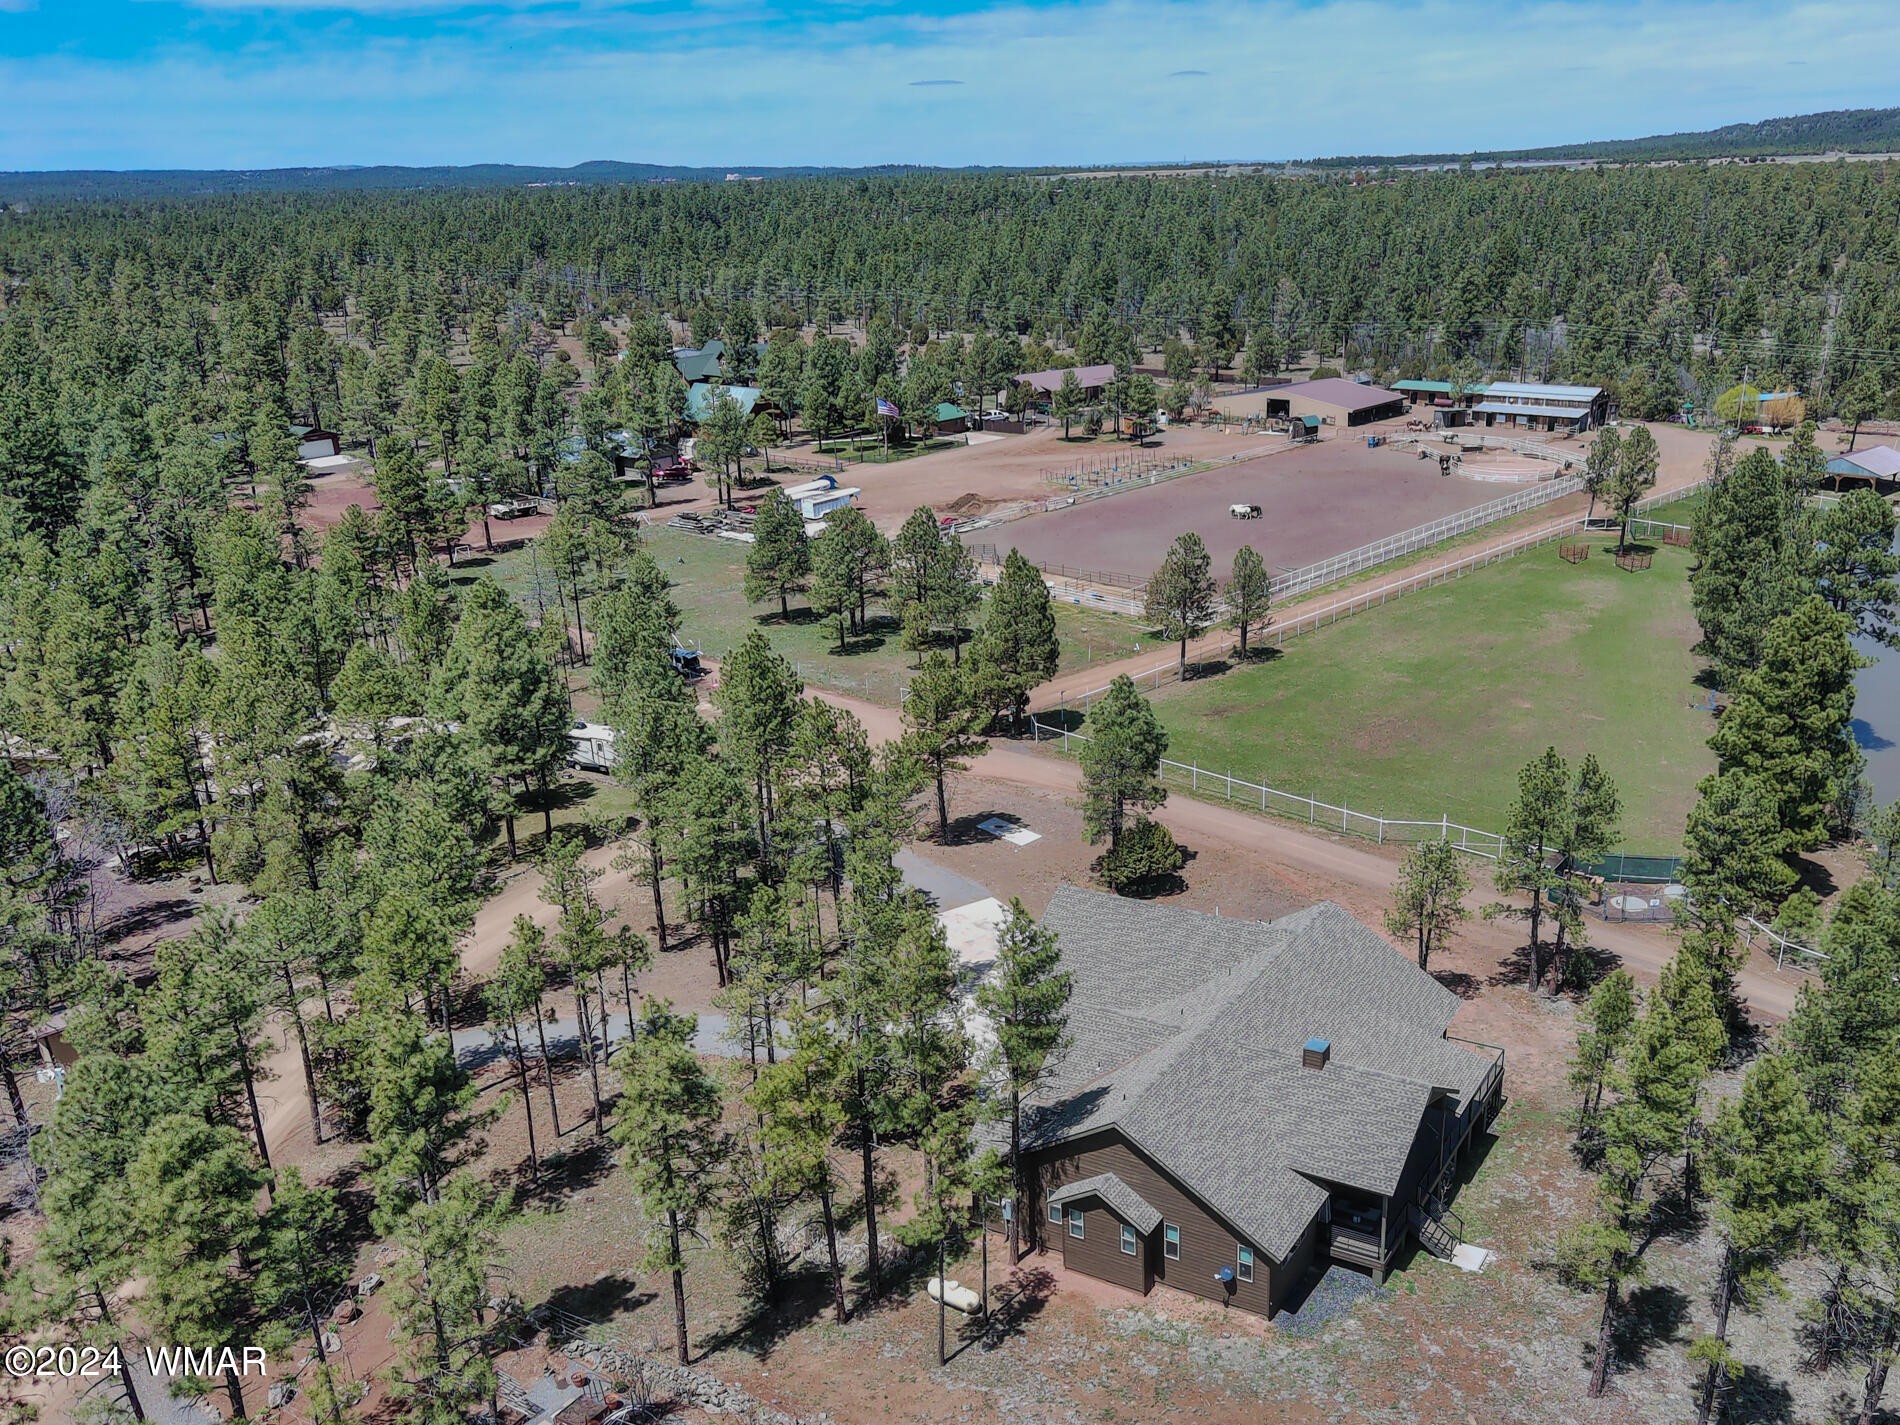 Lakeside, Arizona, 85929, United States, 3 Bedrooms Bedrooms, ,4 BathroomsBathrooms,Residential,For Sale,1511690